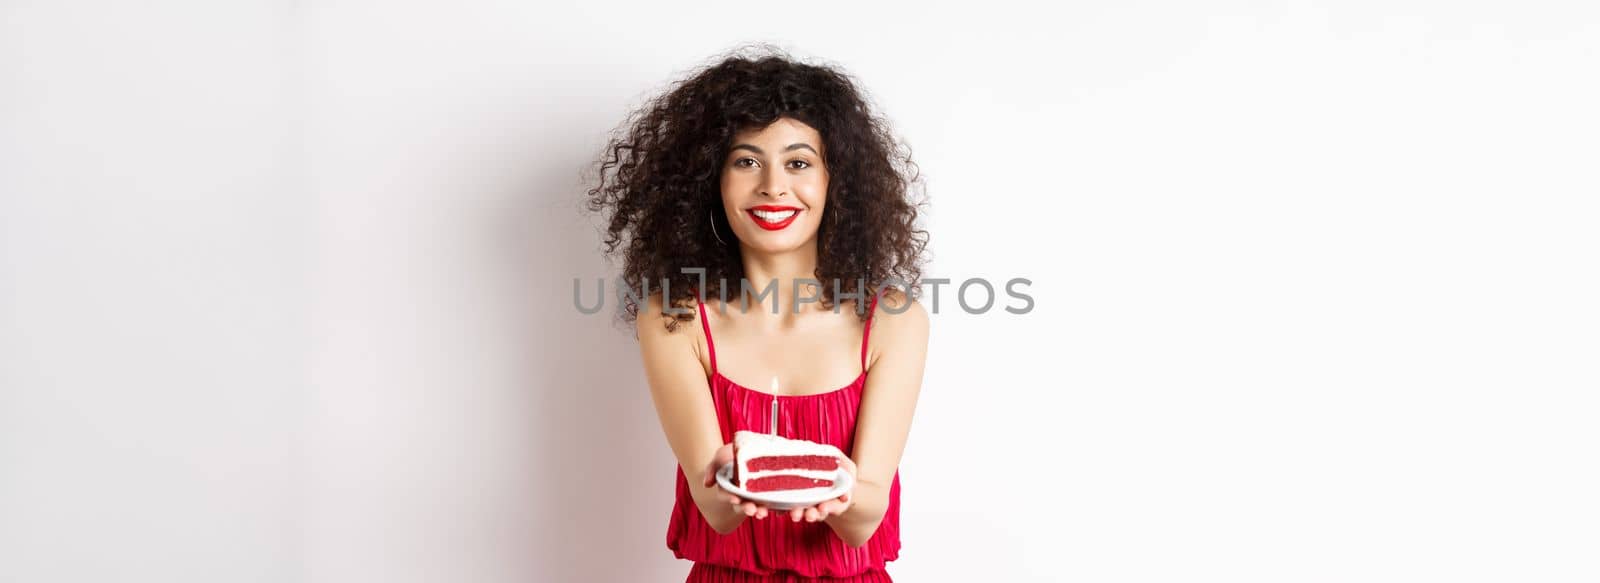 Beautiful woman congratulate with birthday, stretch out bday cake with candle and smiling, standing against white background.